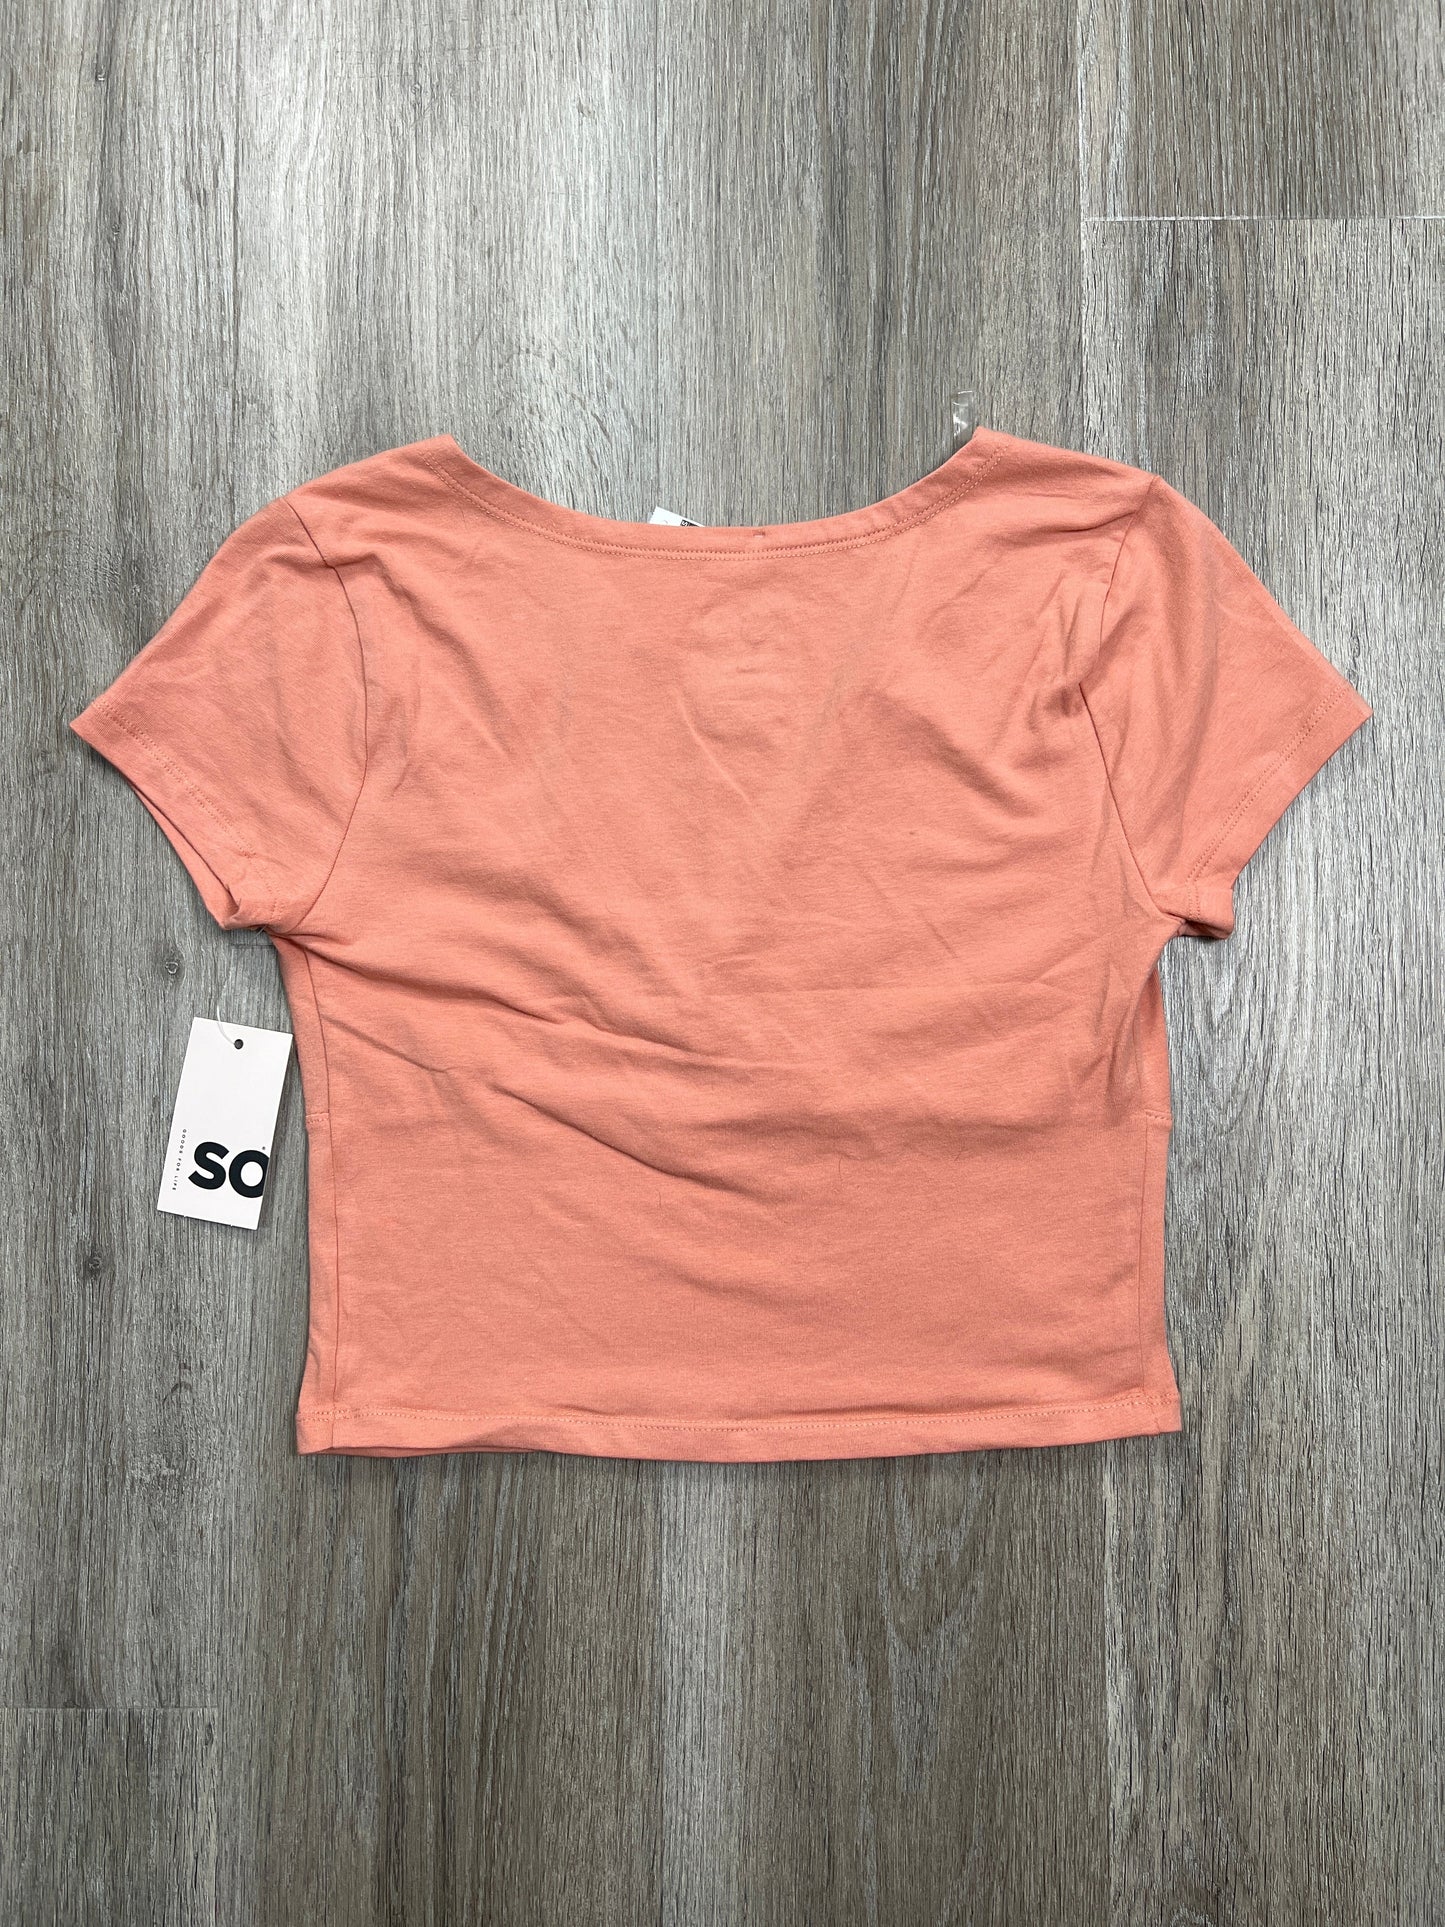 Coral Top Short Sleeve Basic So, Size M